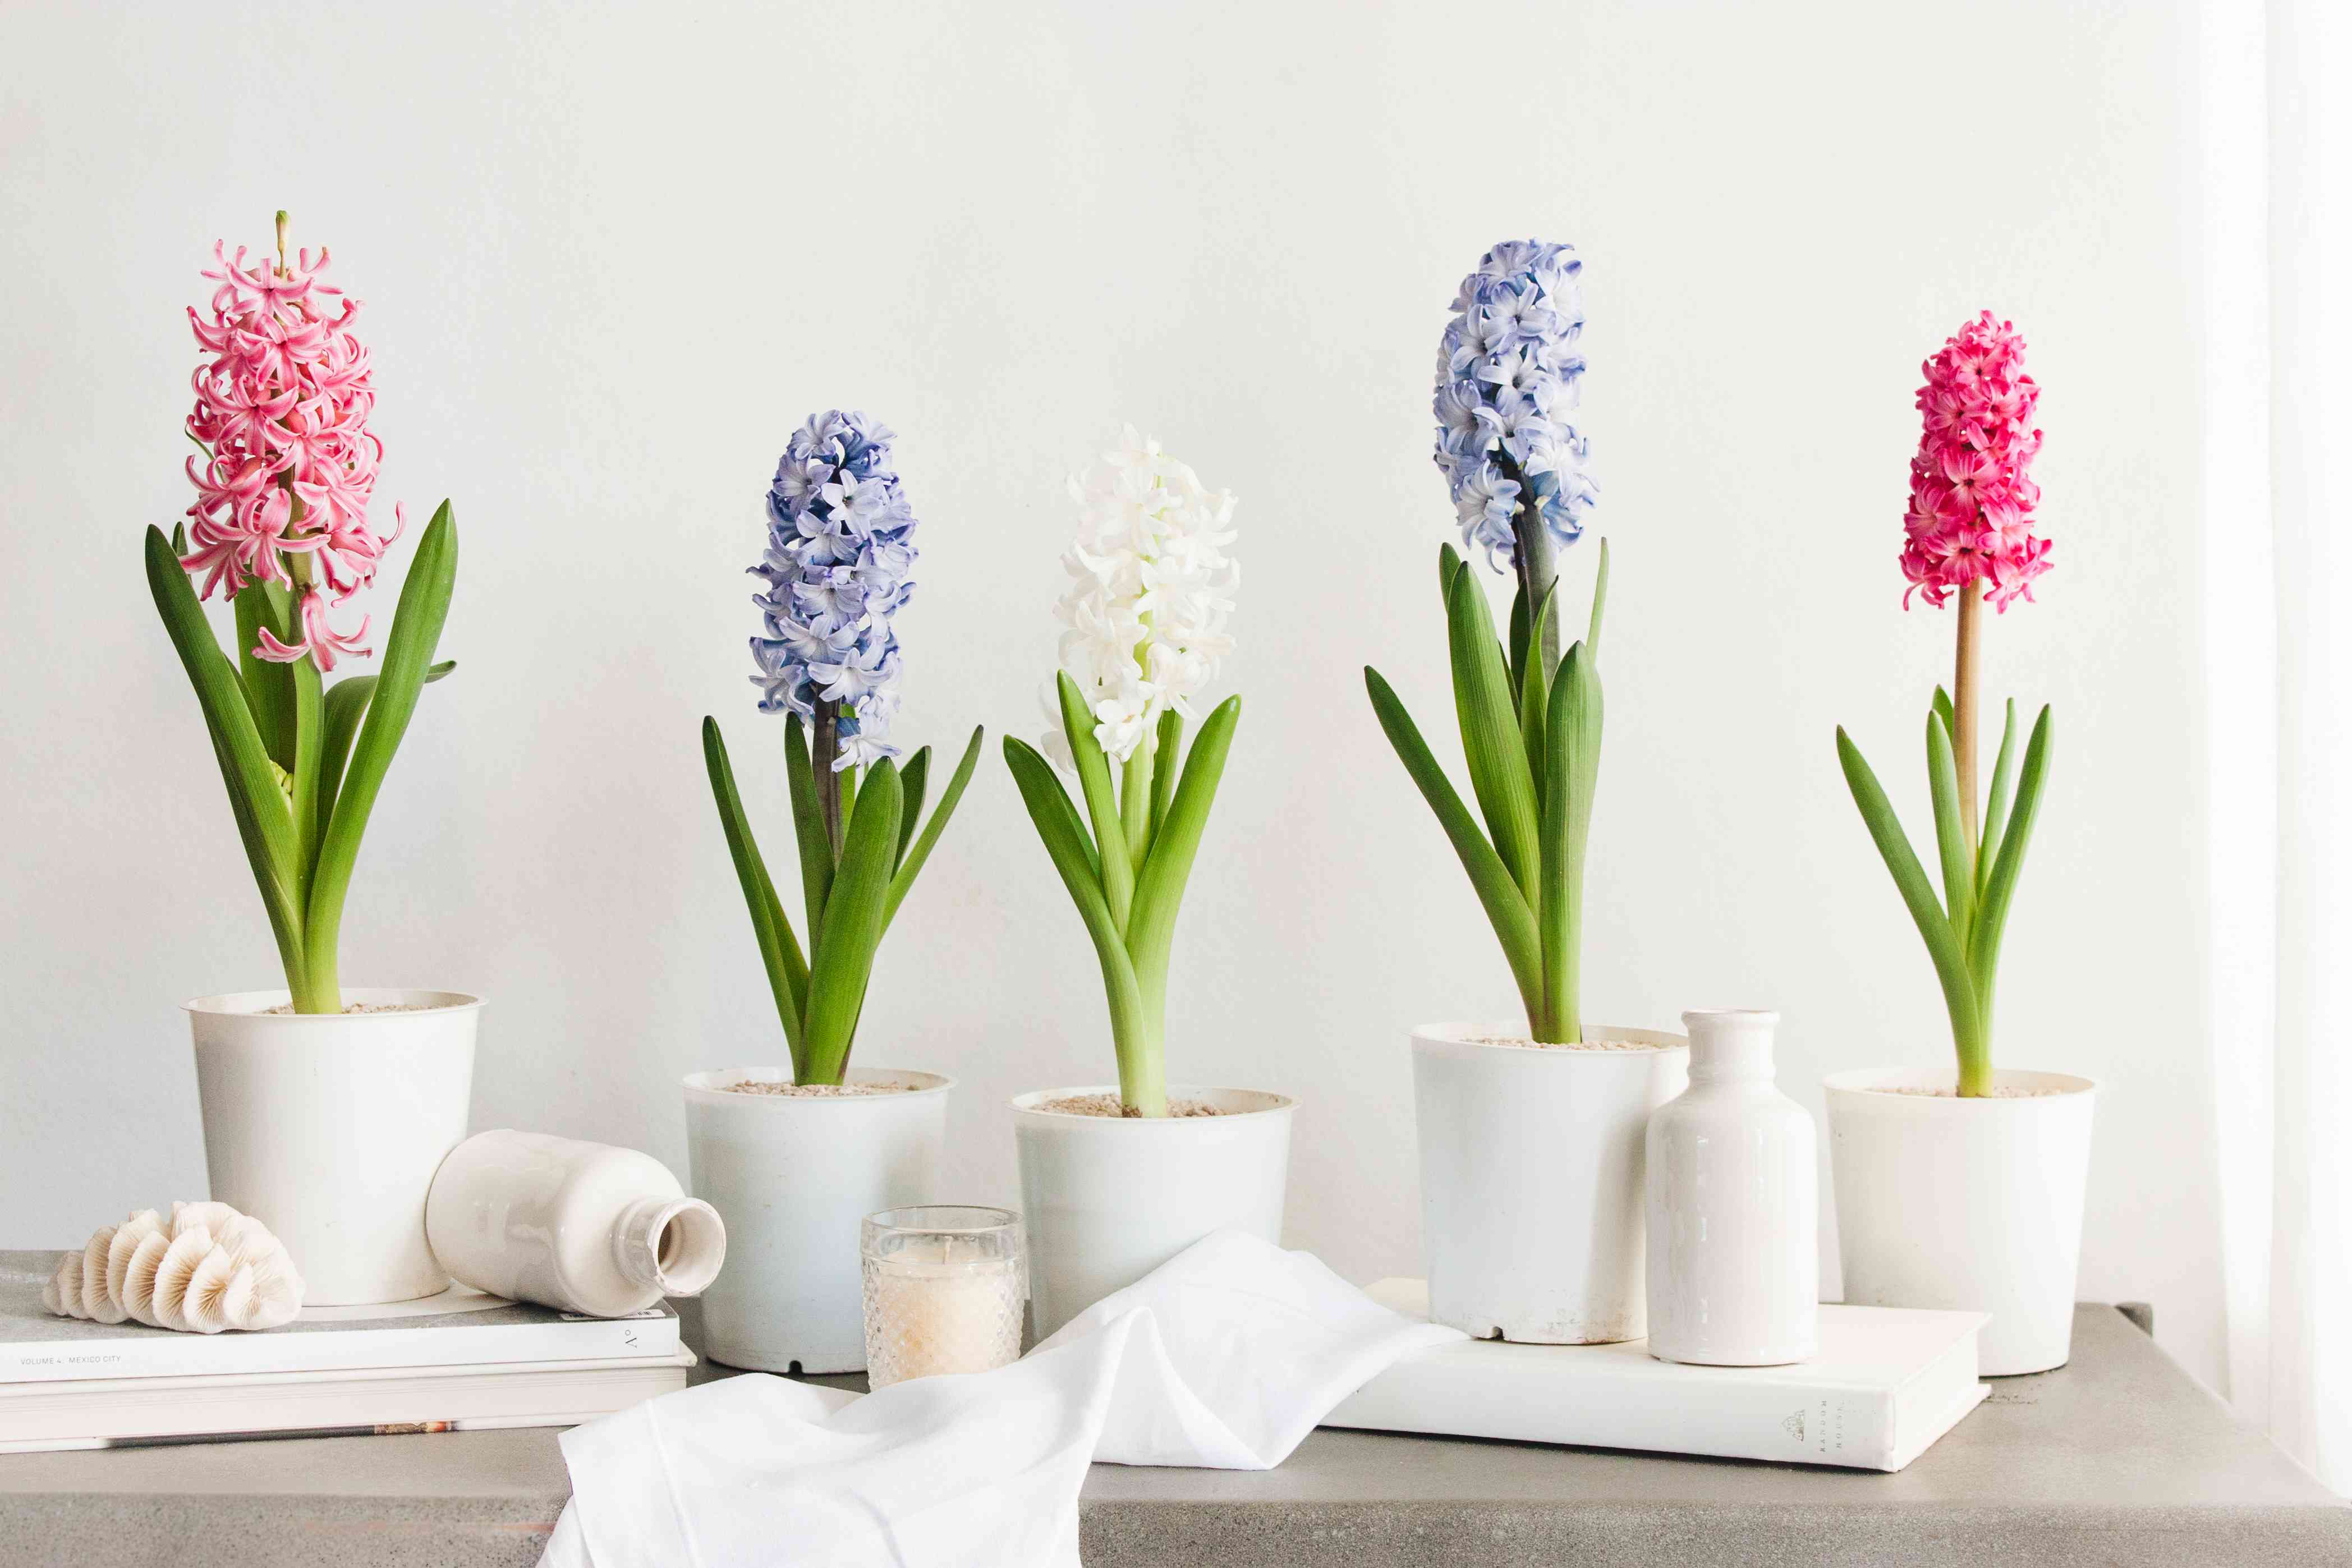 How To Keep Hyacinths In A Vase